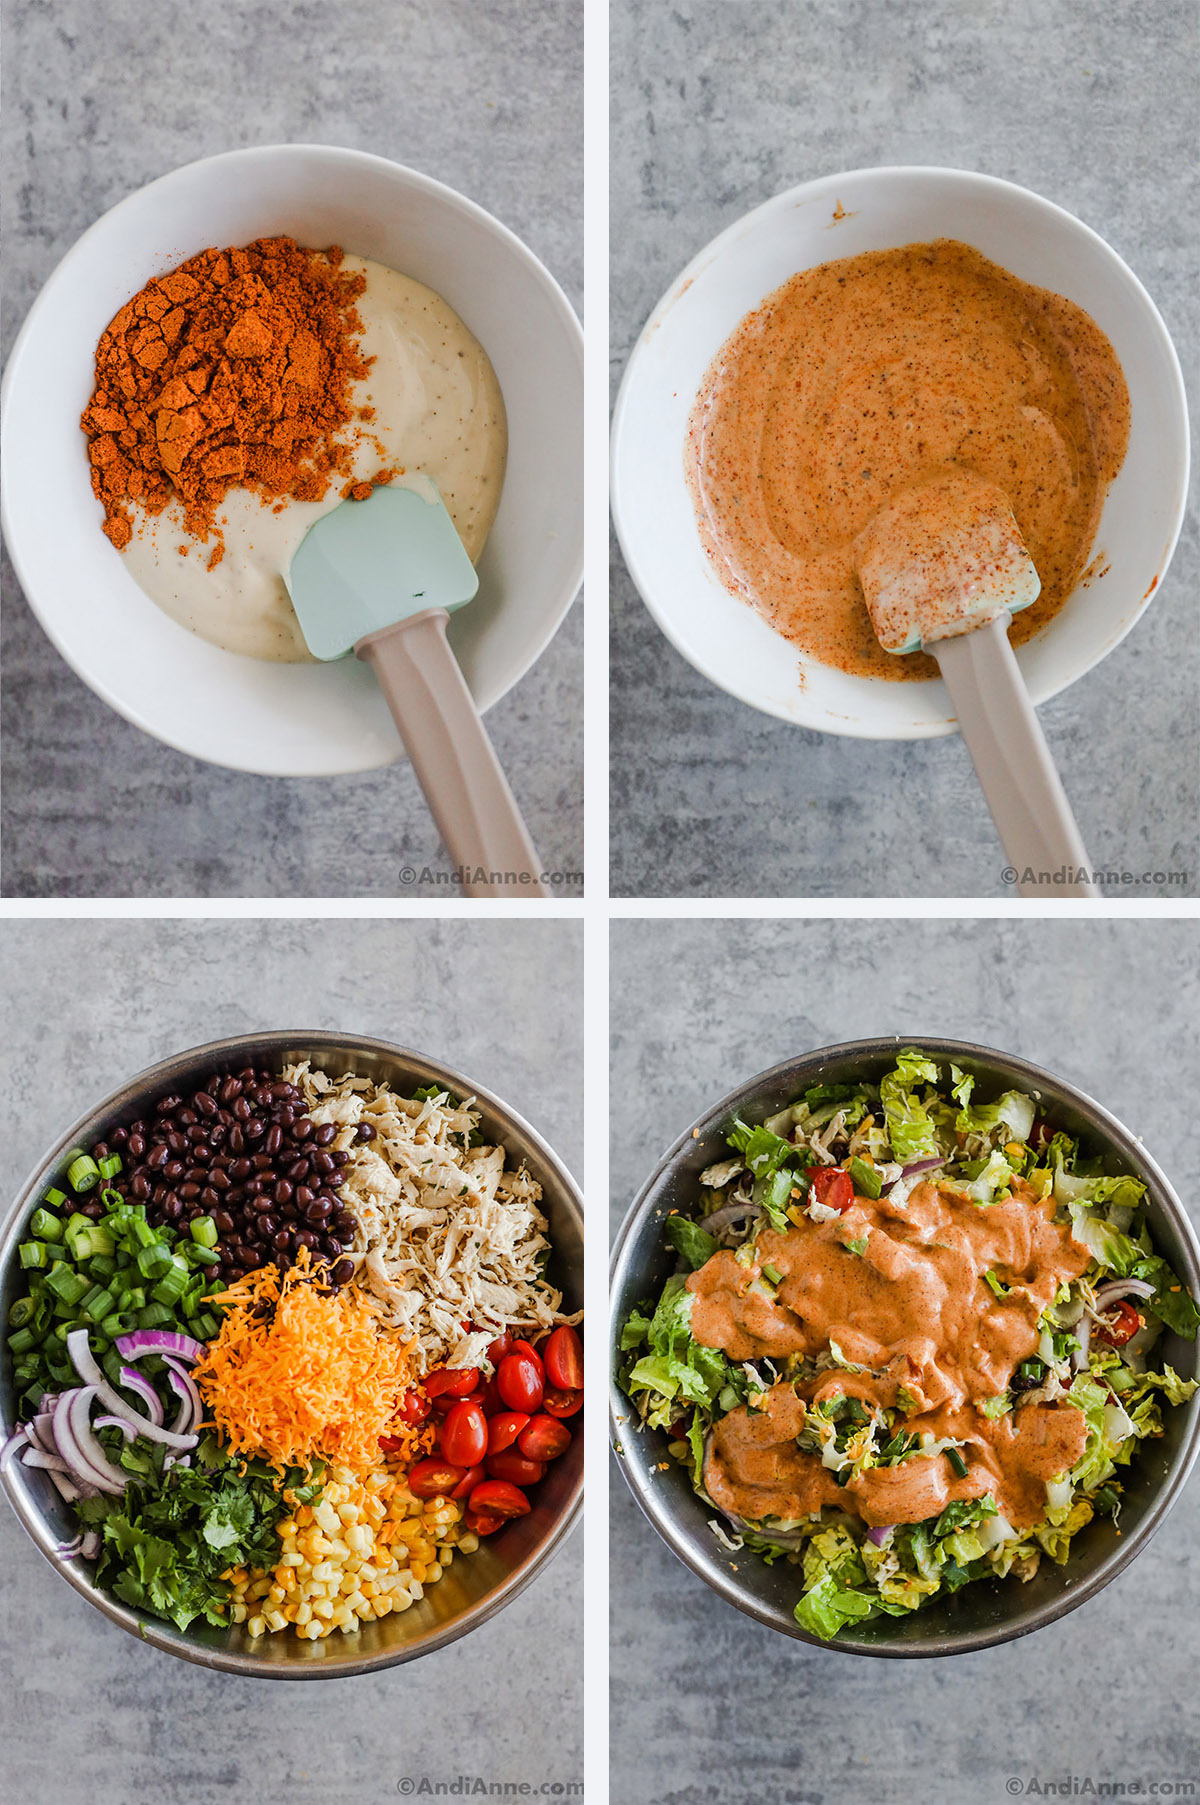 Four images. First two are salad dressing ingredients being mixed in a bowl. Second two are salad ingredients added to a large bowl, then tossed and dressing poured on top.